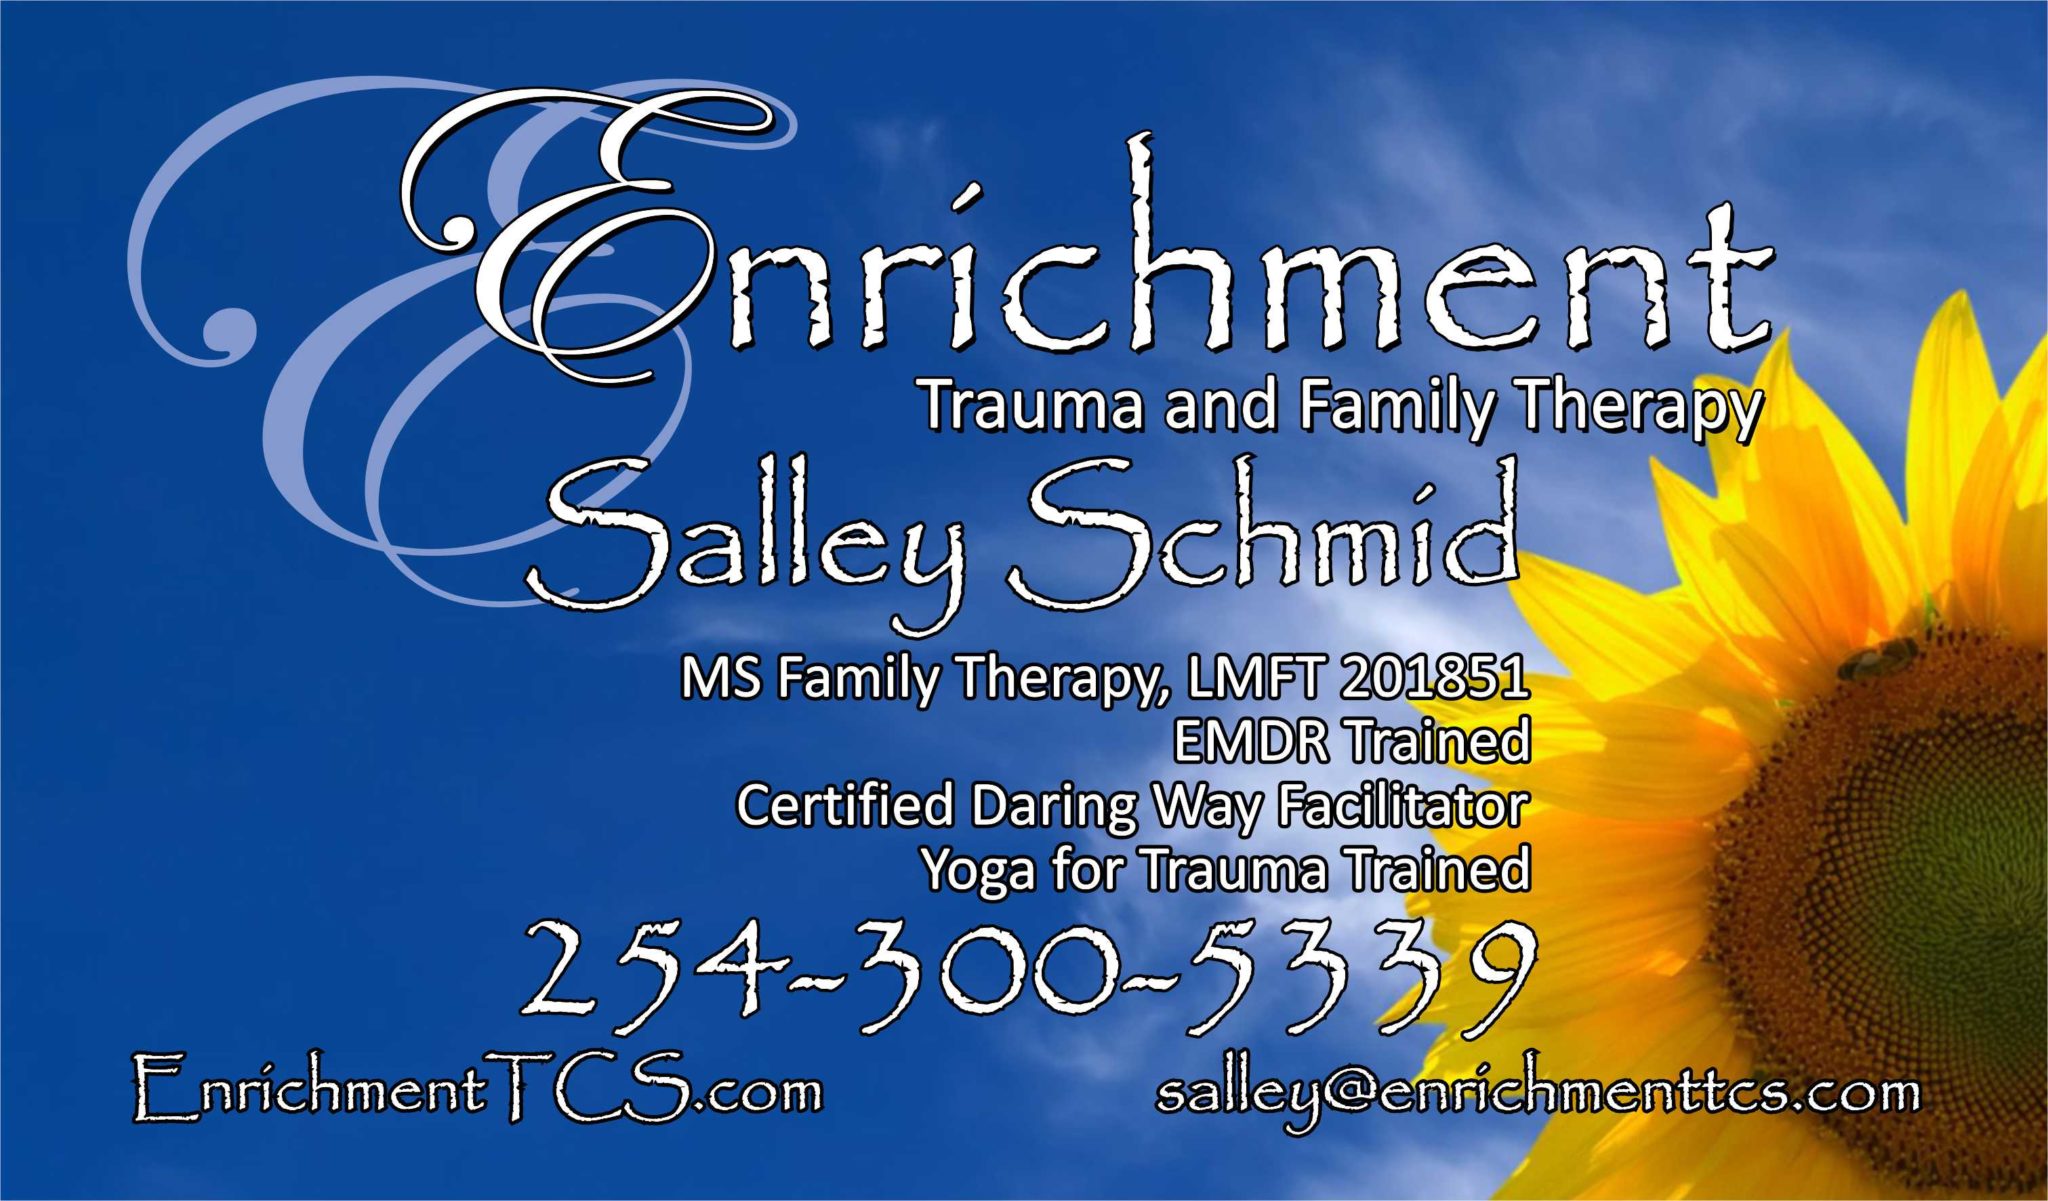 Salley Schmid - Enrichment Training & Counseling Solutions - Waco, Texas